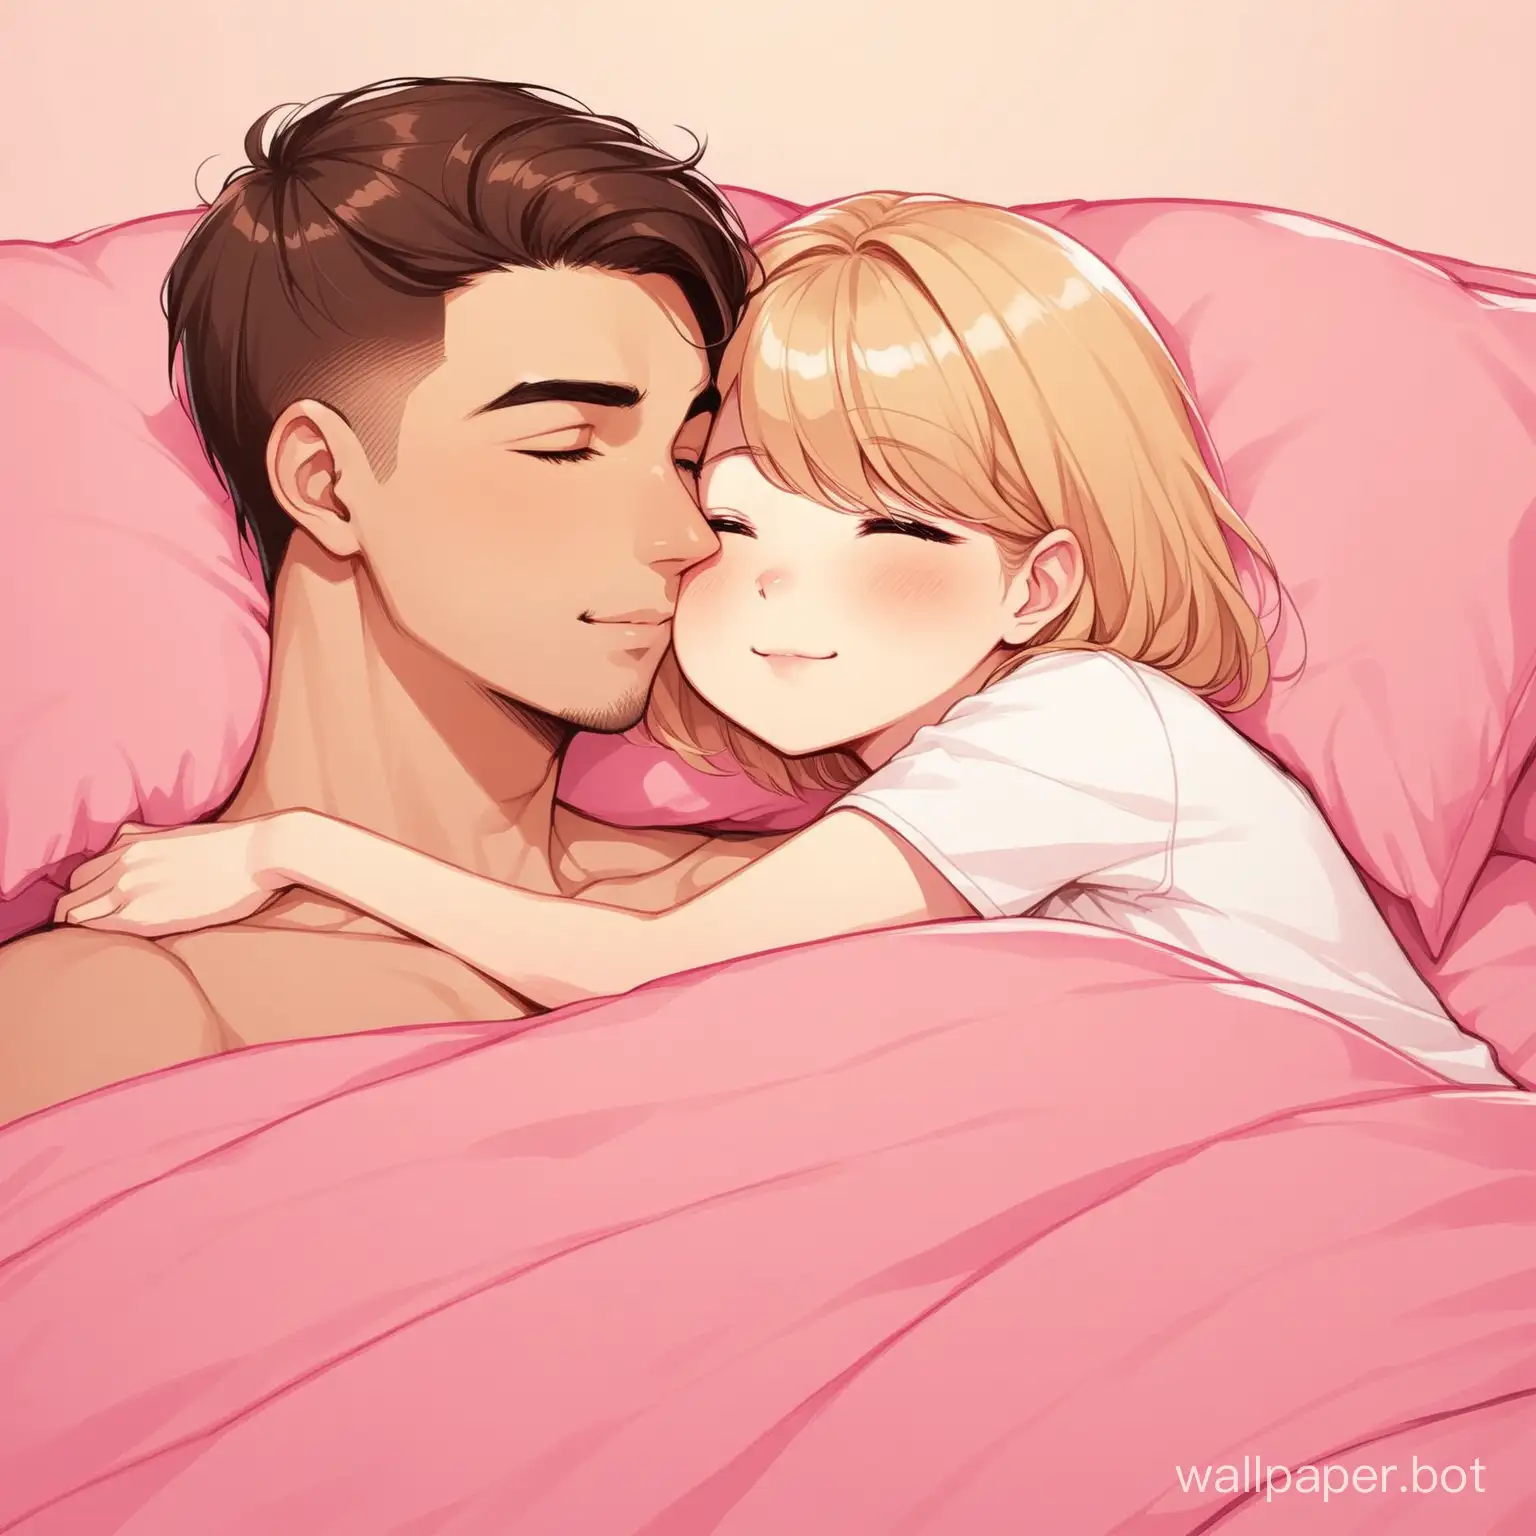 cute little mousy blondish brownish haired girl cuddling cute tall mexican (no hat) fade haircut man snuggles romantically in pink bed